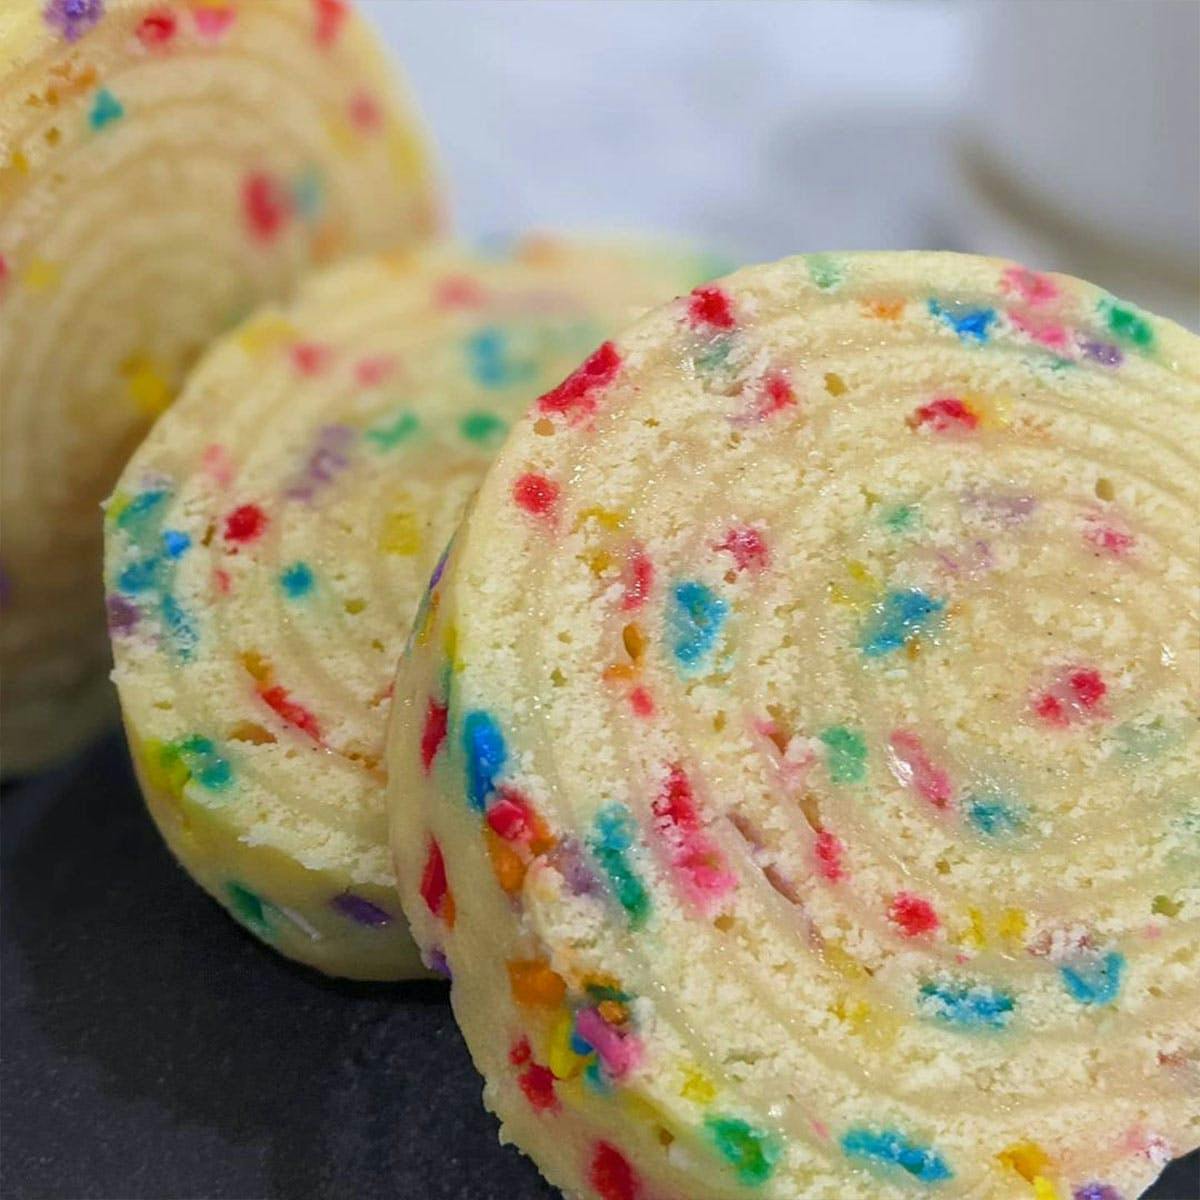 Sprinkles 101: Types Of Sprinkles, Uses & More! - Sweets & Thank You